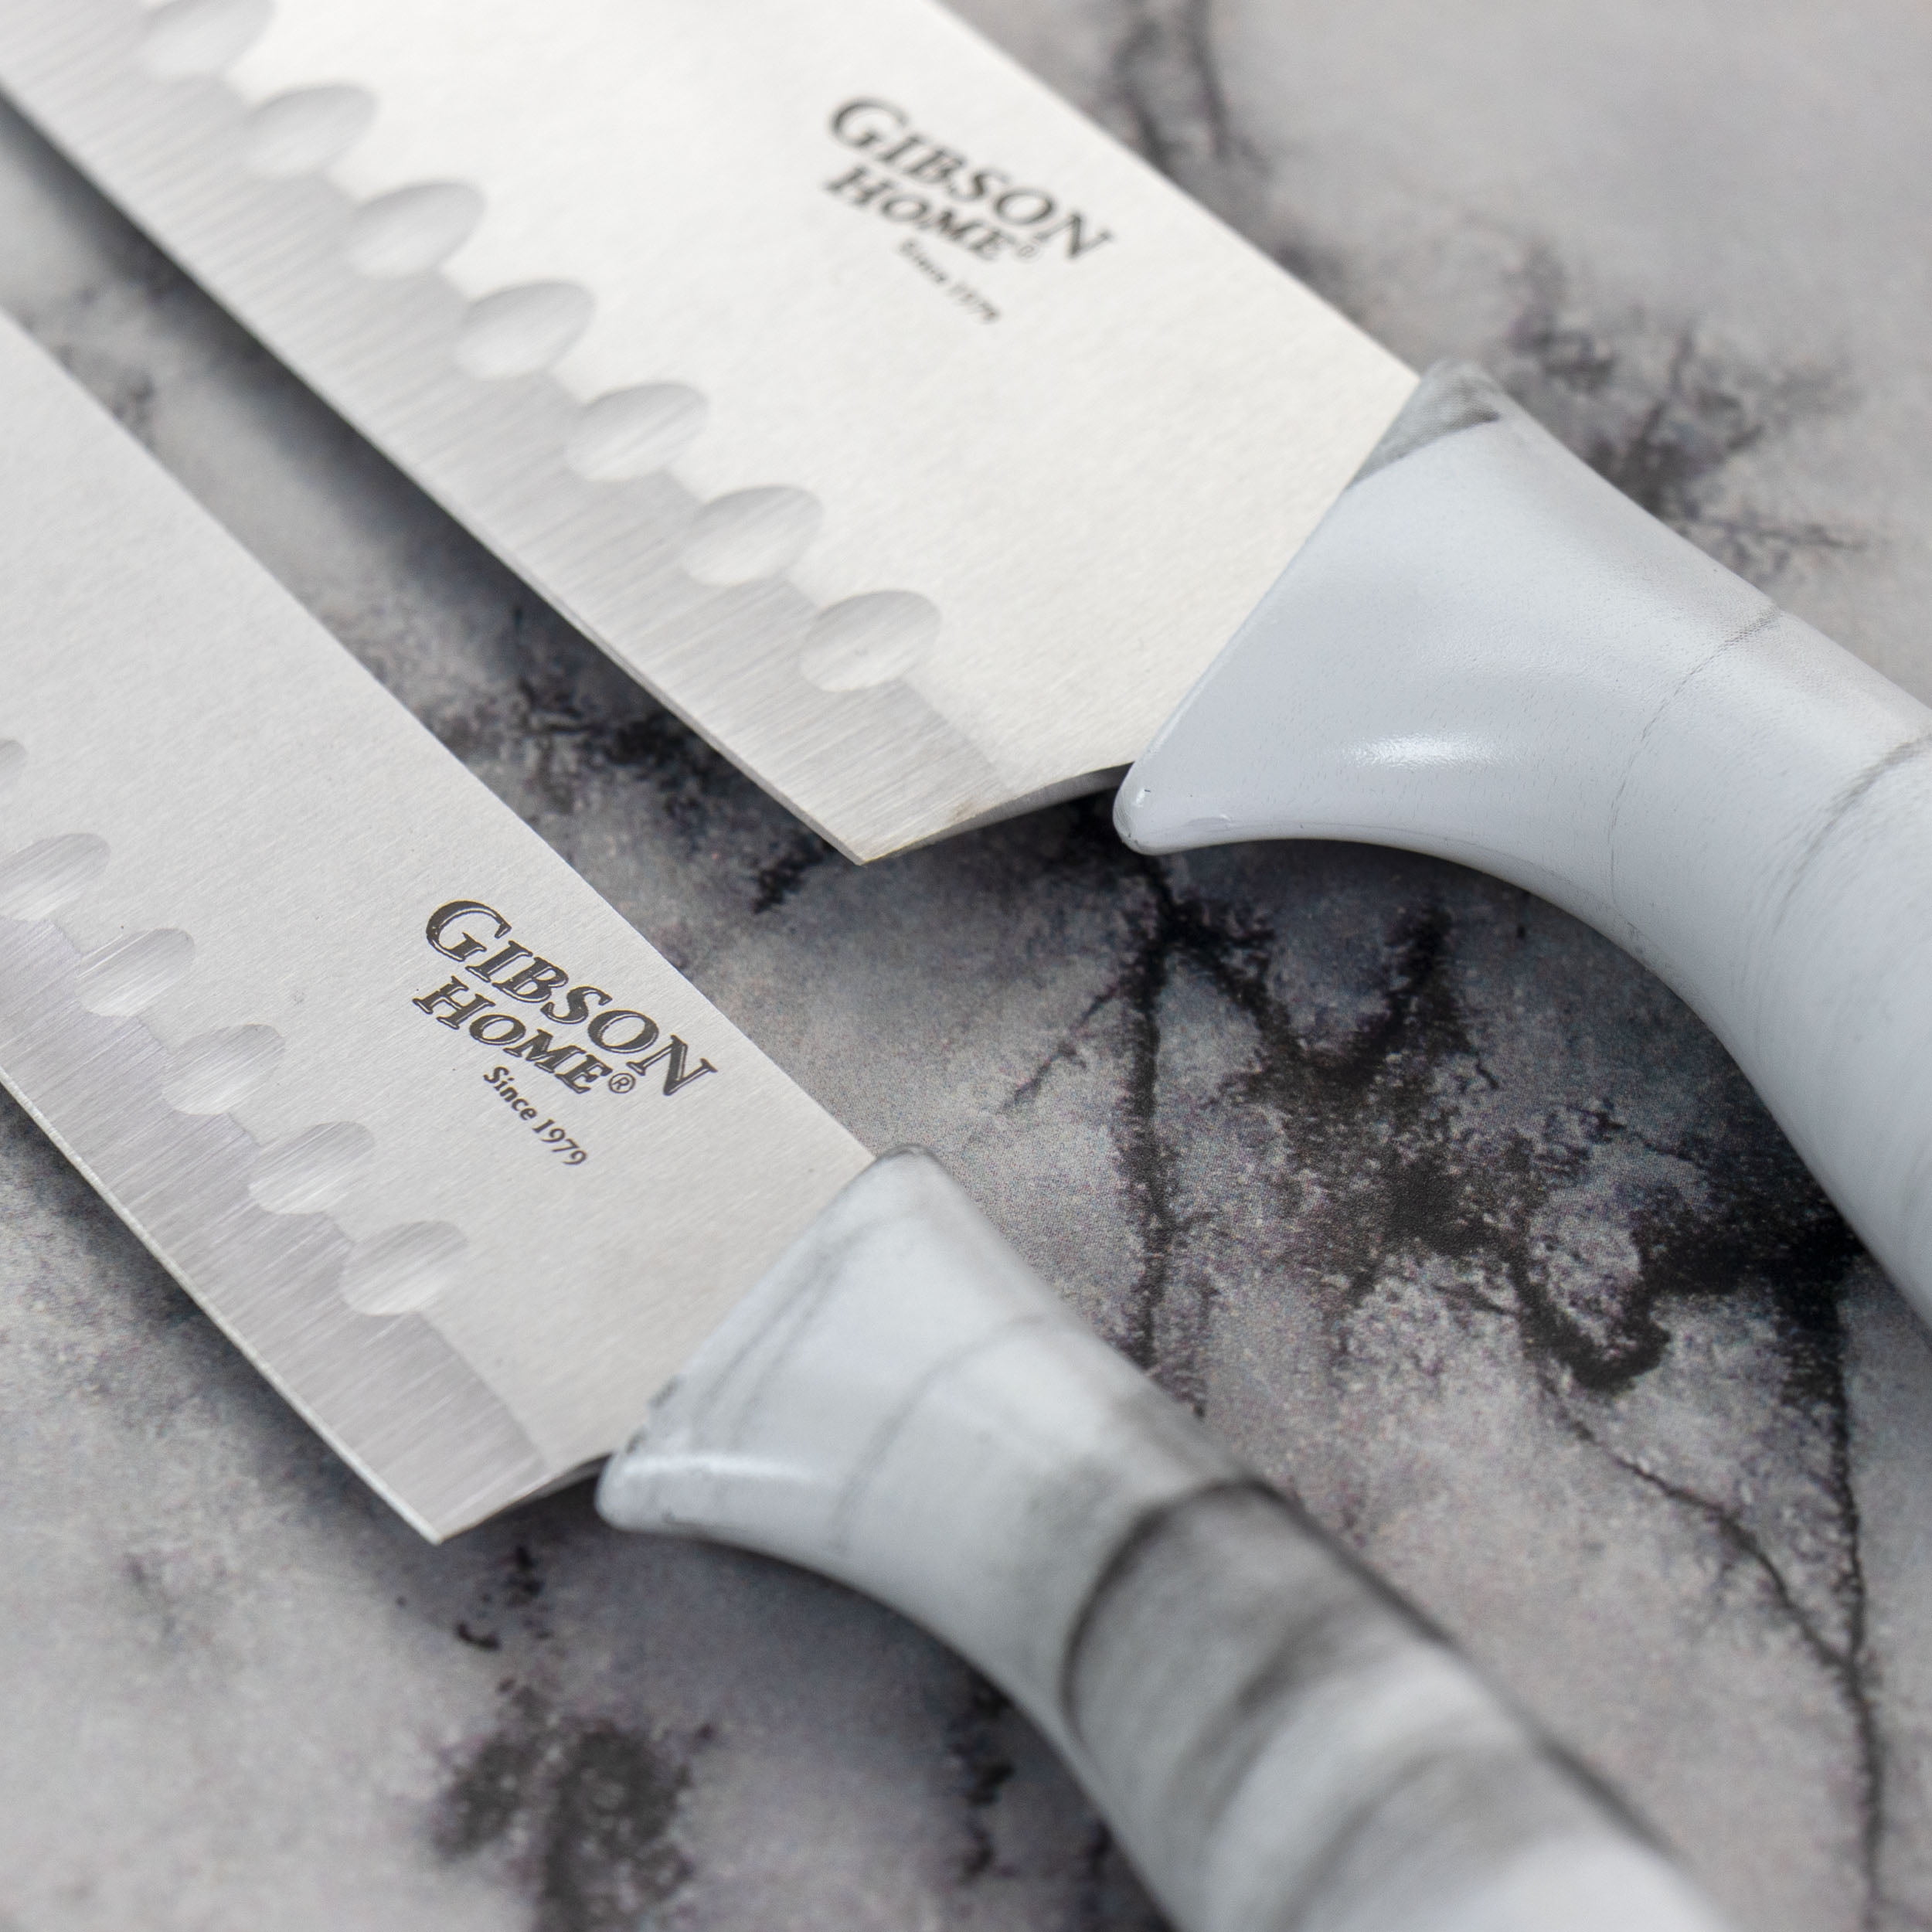 Gibson Home Seward 2 Piece Stainless Steel Santoku Cutlery Set with Wooden Handle